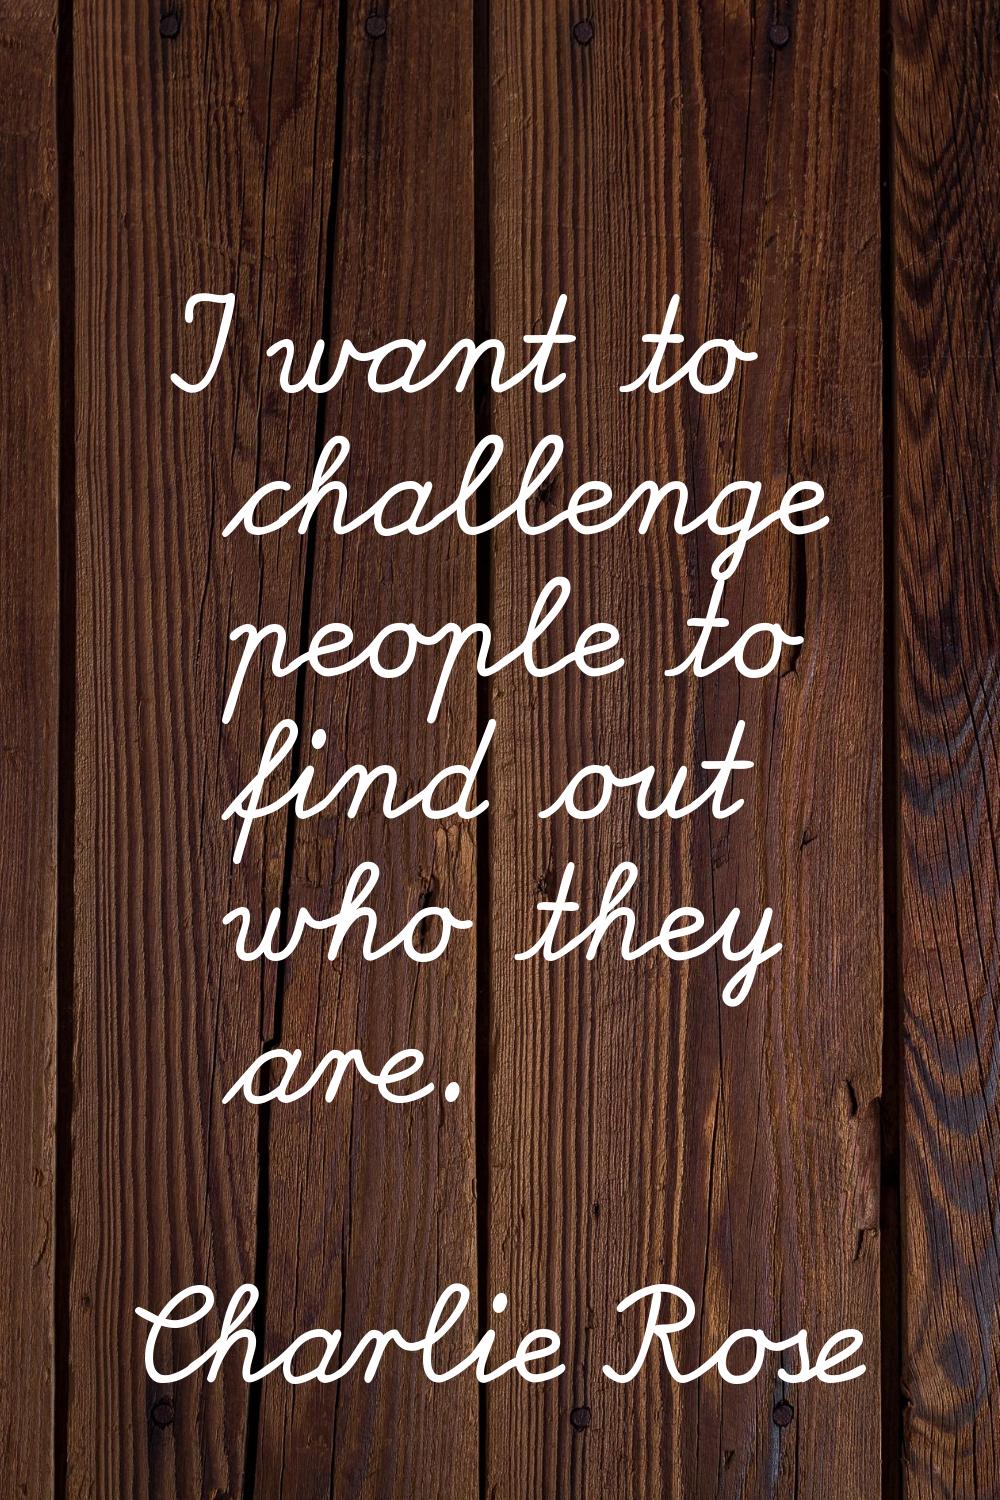 I want to challenge people to find out who they are.